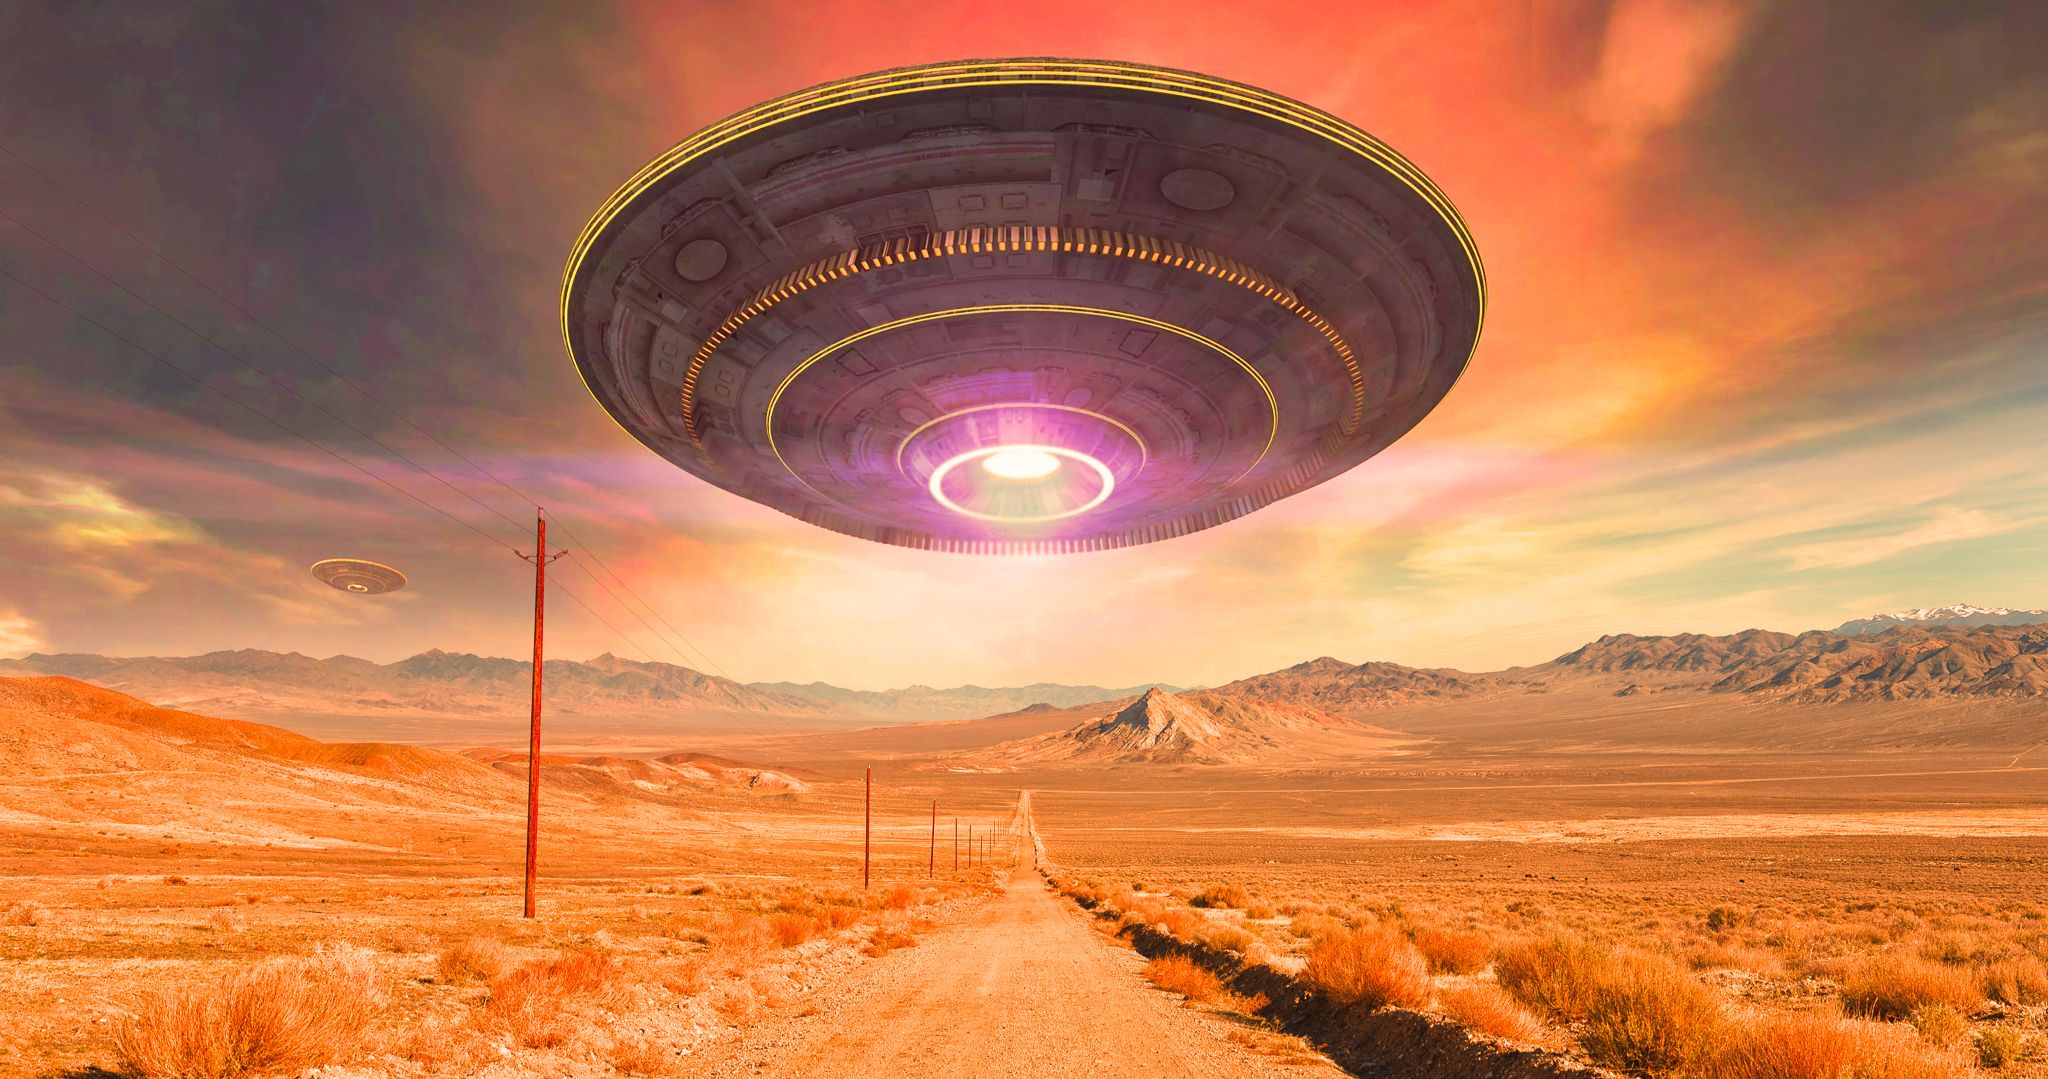 400,000 People Pledge to Storm Area 51 on September 20th